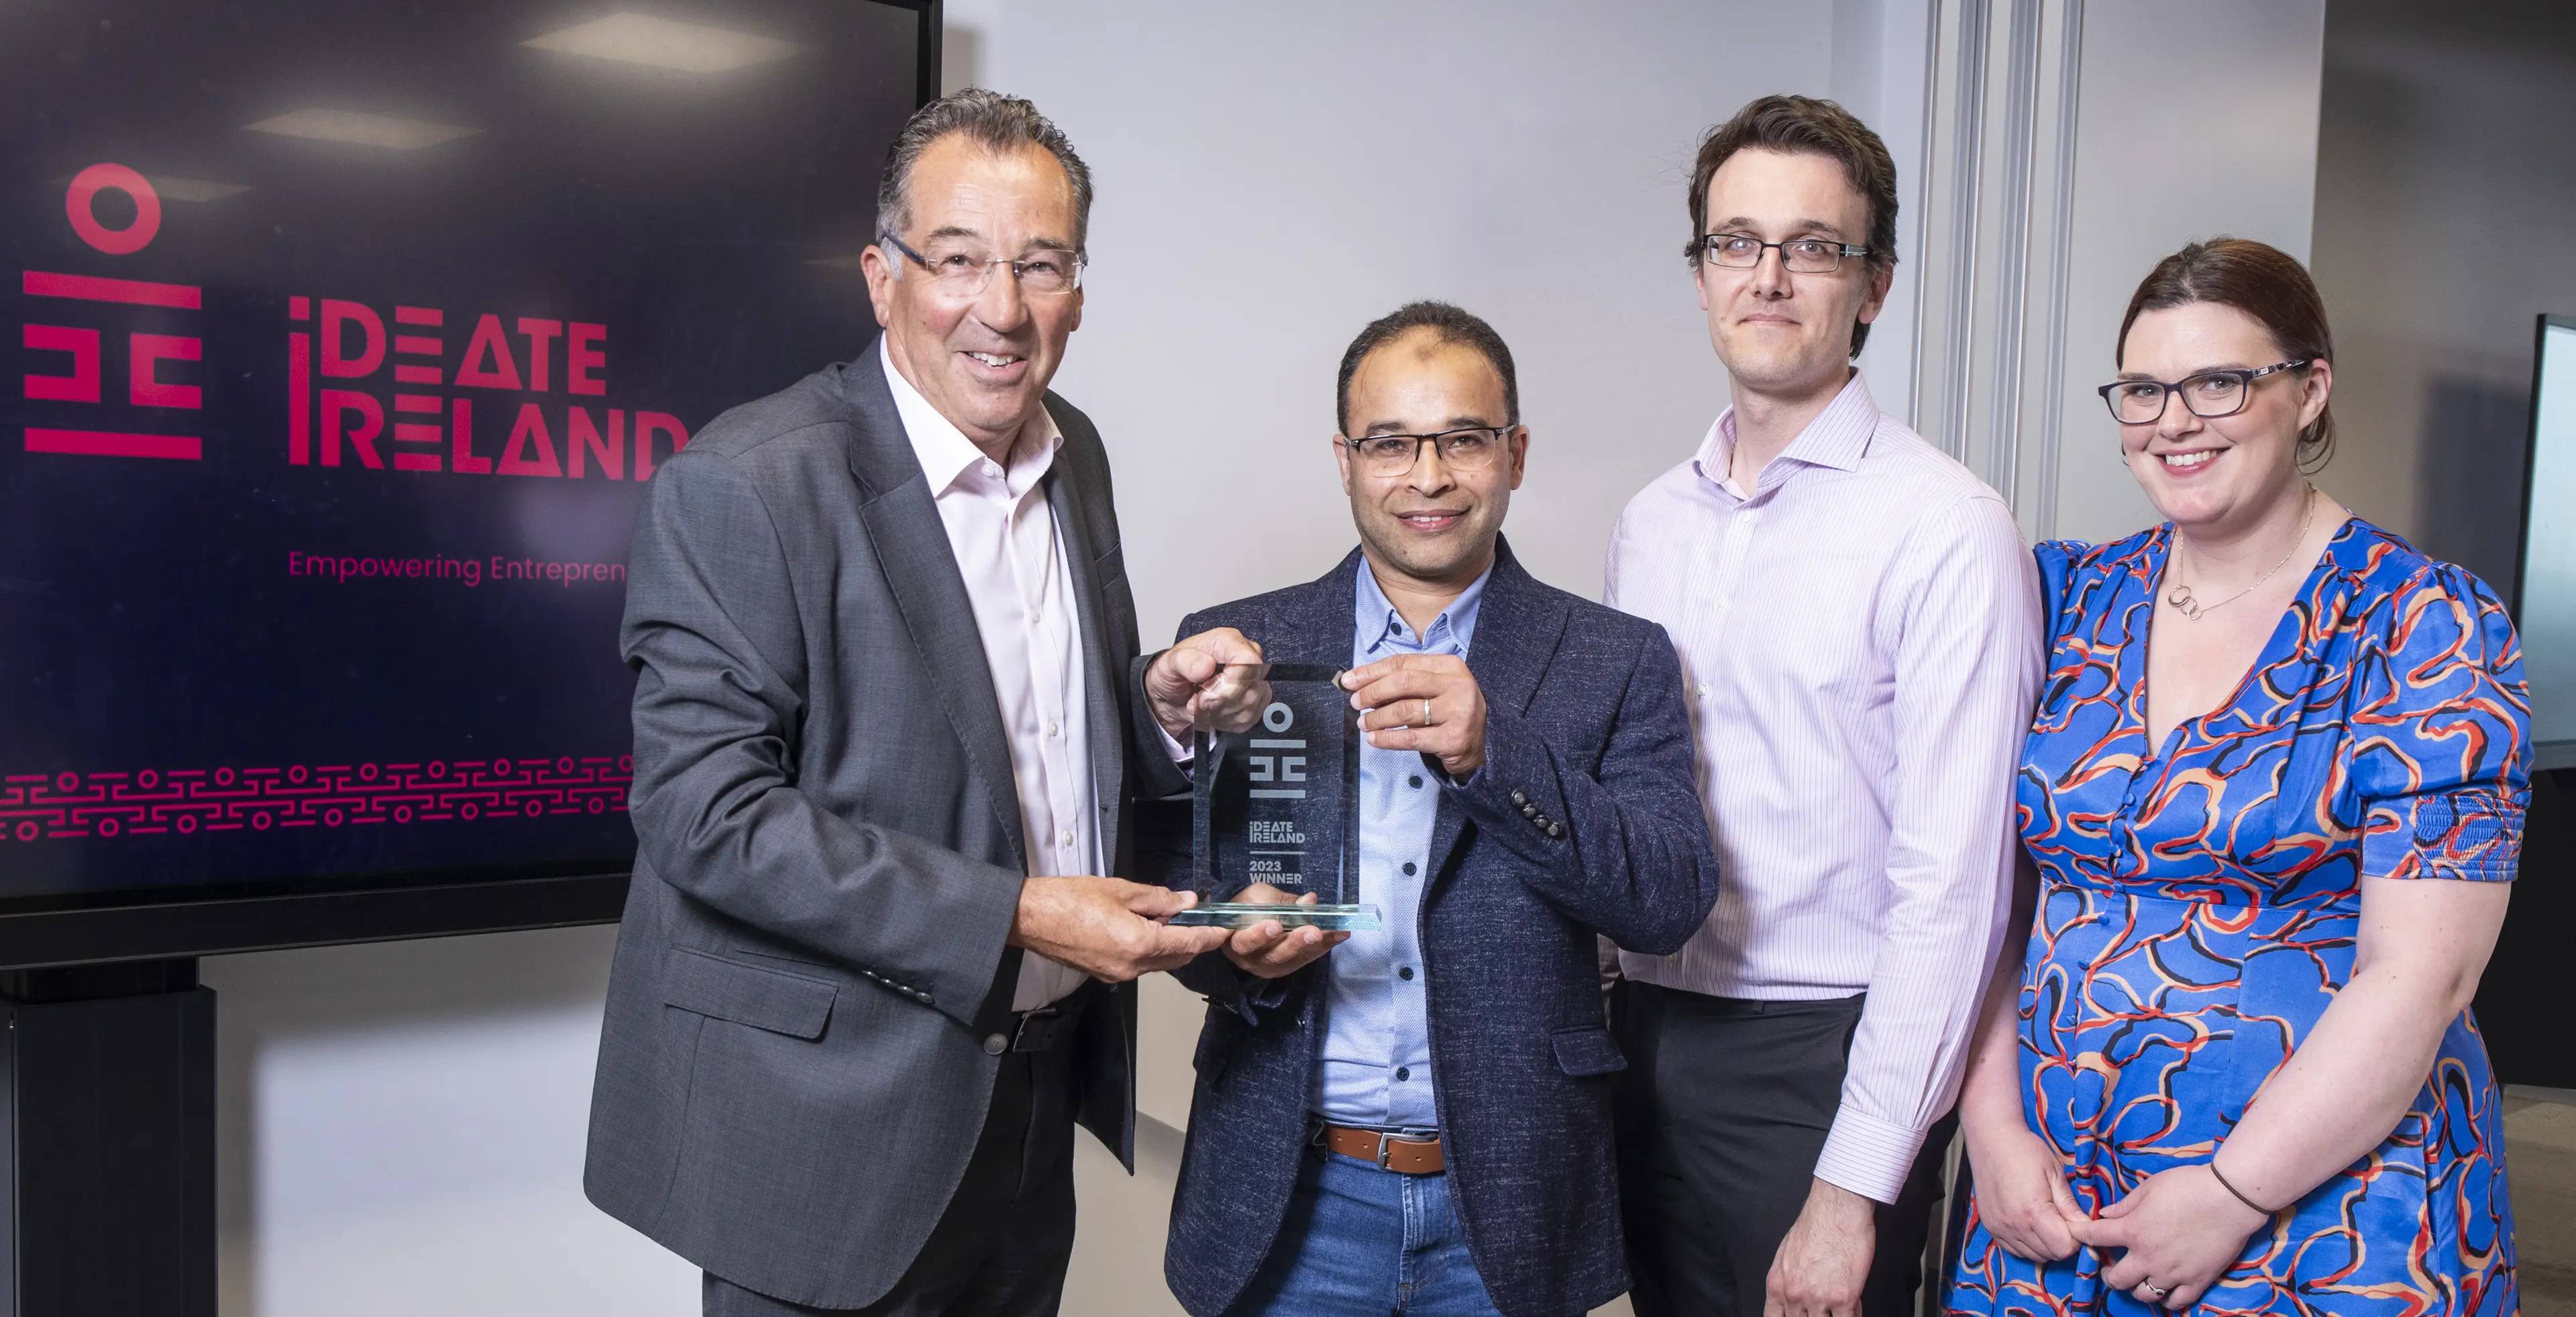 Pictured left to right is David Moffitt, Chair, IDEATE Ireland with Dr. Waleed Faisal of Array Patch, and Dr. Ziad Sartawi and Dr. Caroline Blackshields from University College Cork 